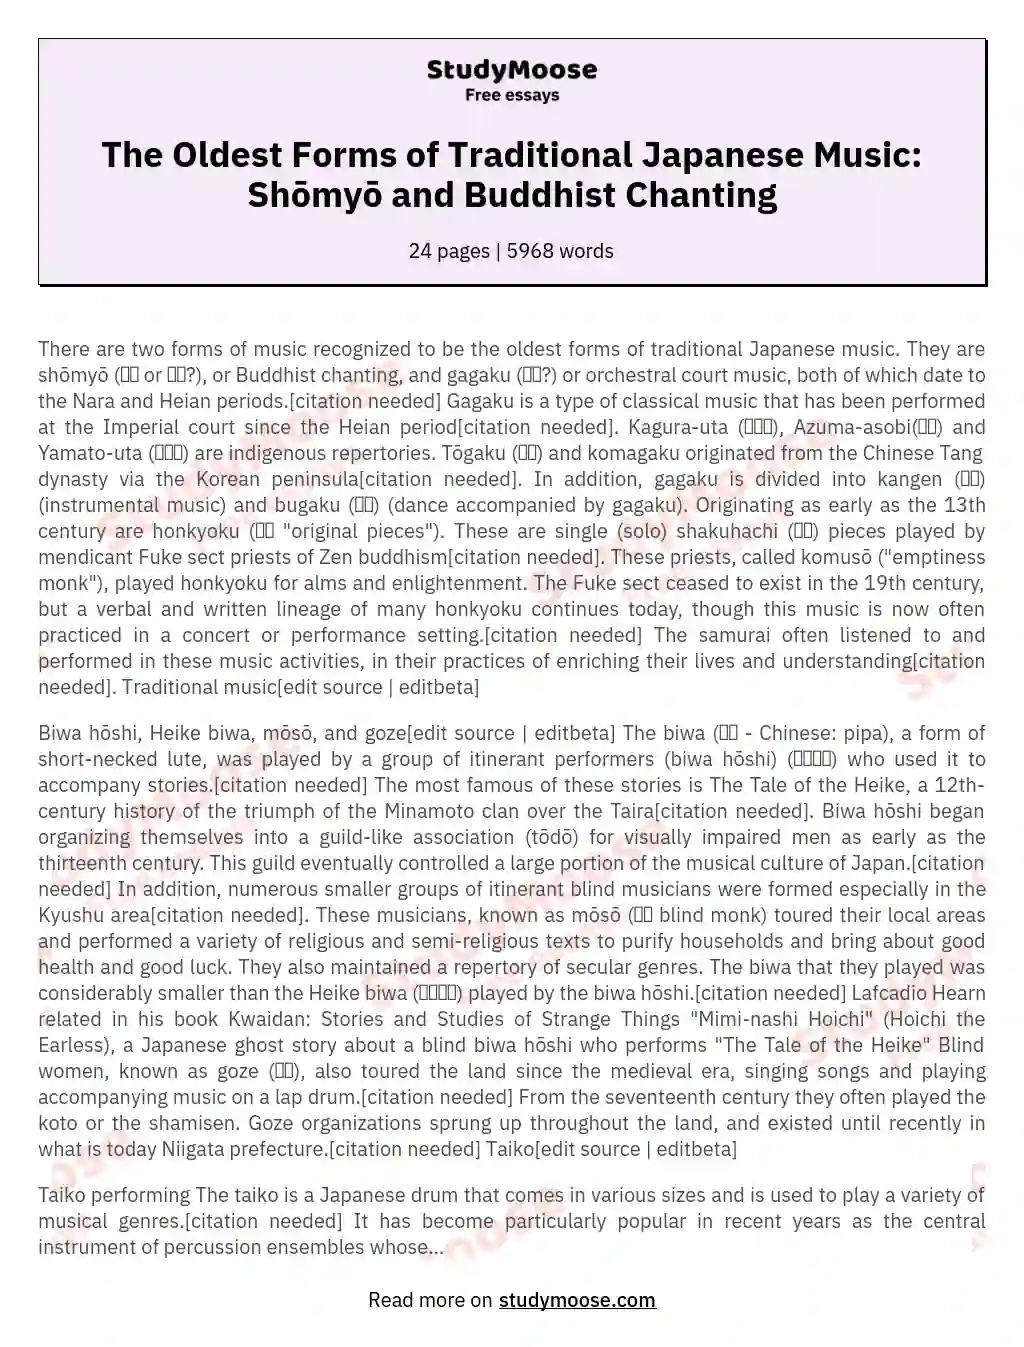 The Oldest Forms of Traditional Japanese Music: Shōmyō and Buddhist Chanting essay